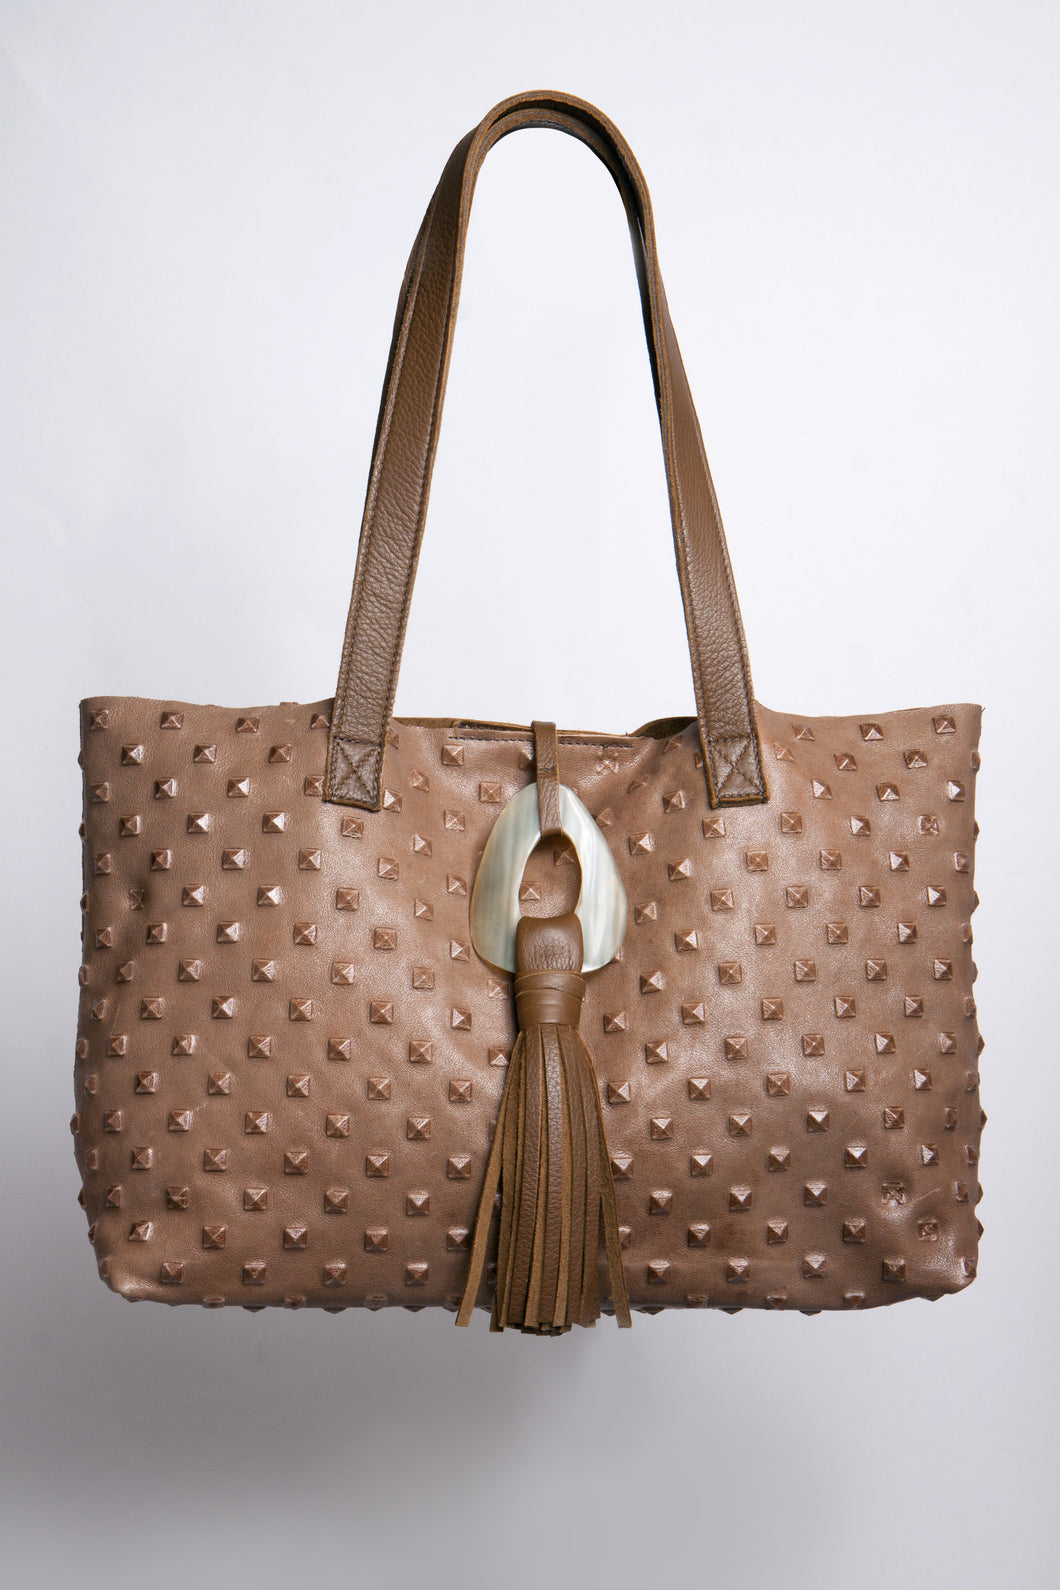 <b>Stacie</b><br> <p><font size=“3px”> Taupe Pyramid Tote With Horn Tassel</font></p>